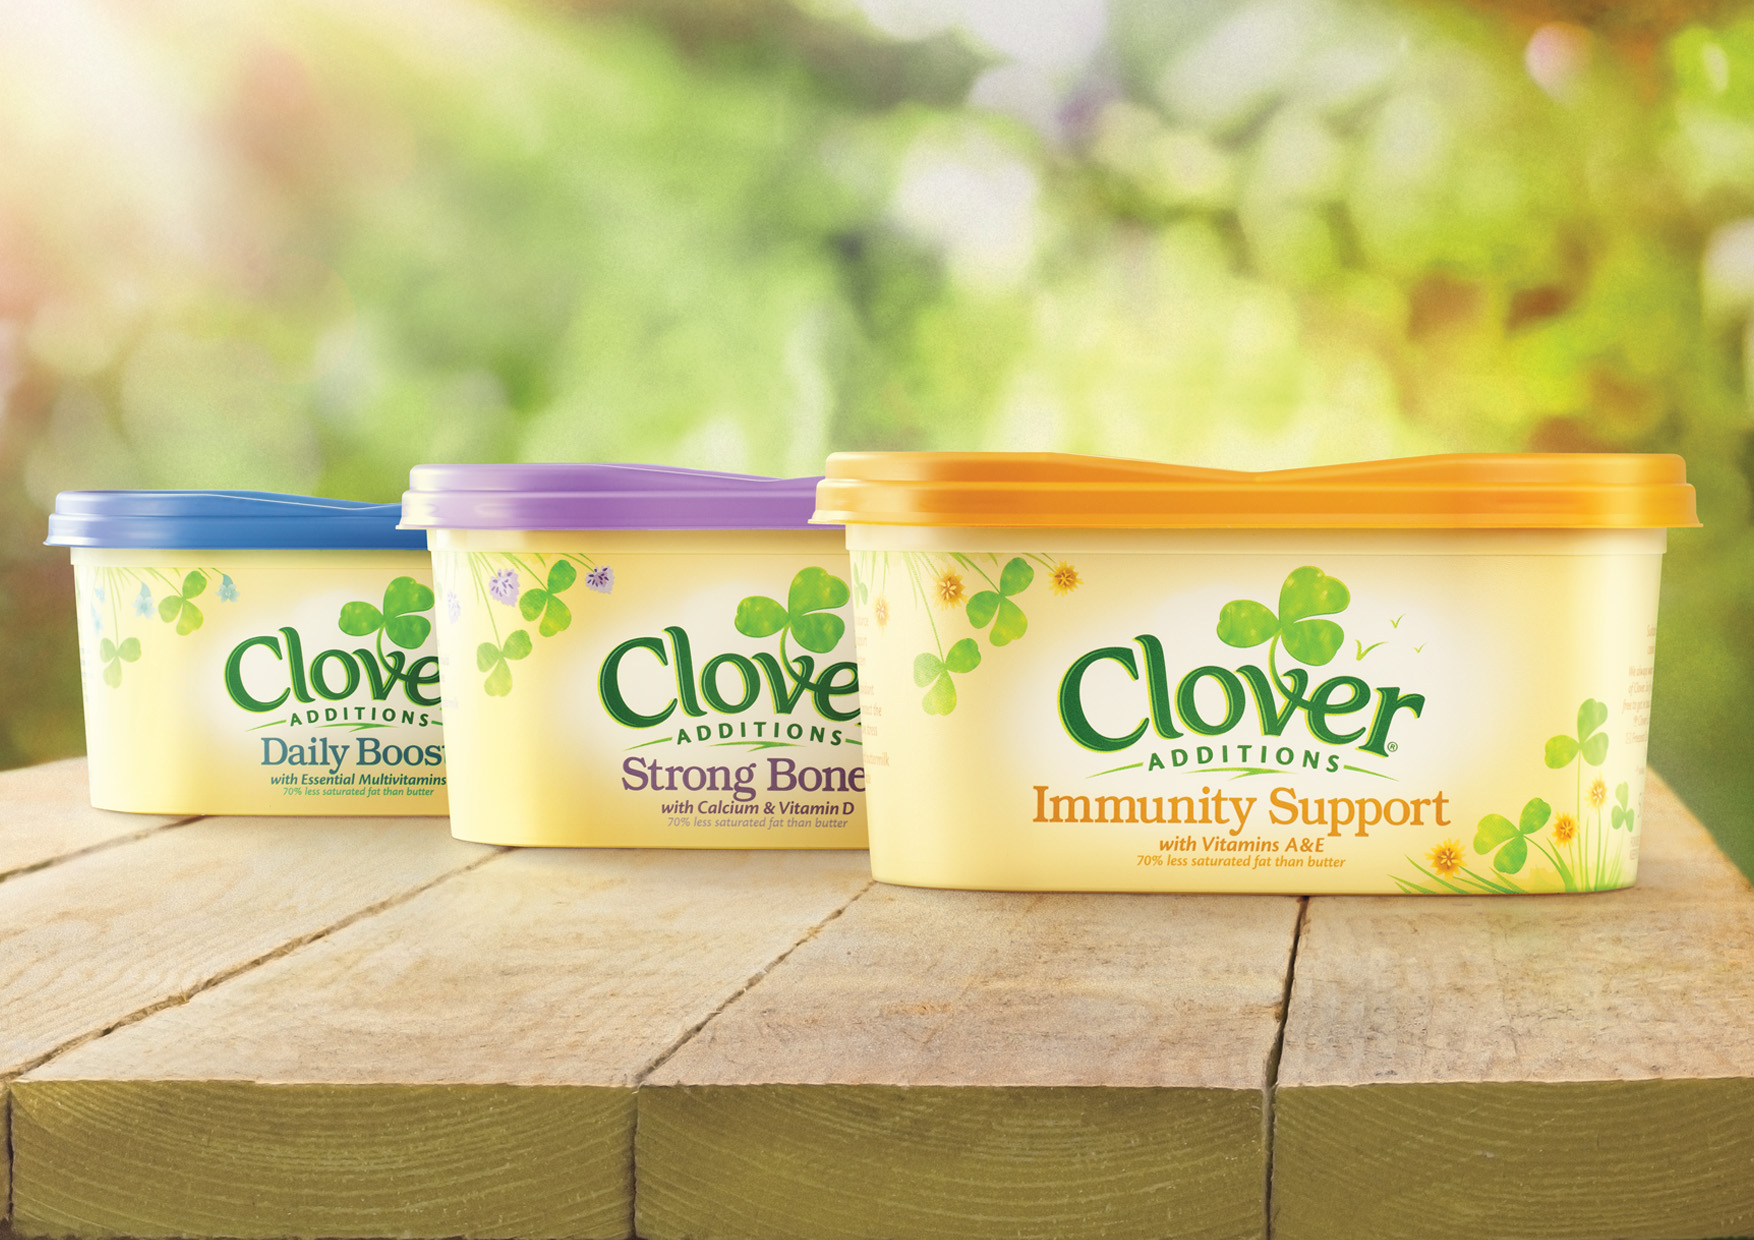 Photo: new Clover visual identity and packaging